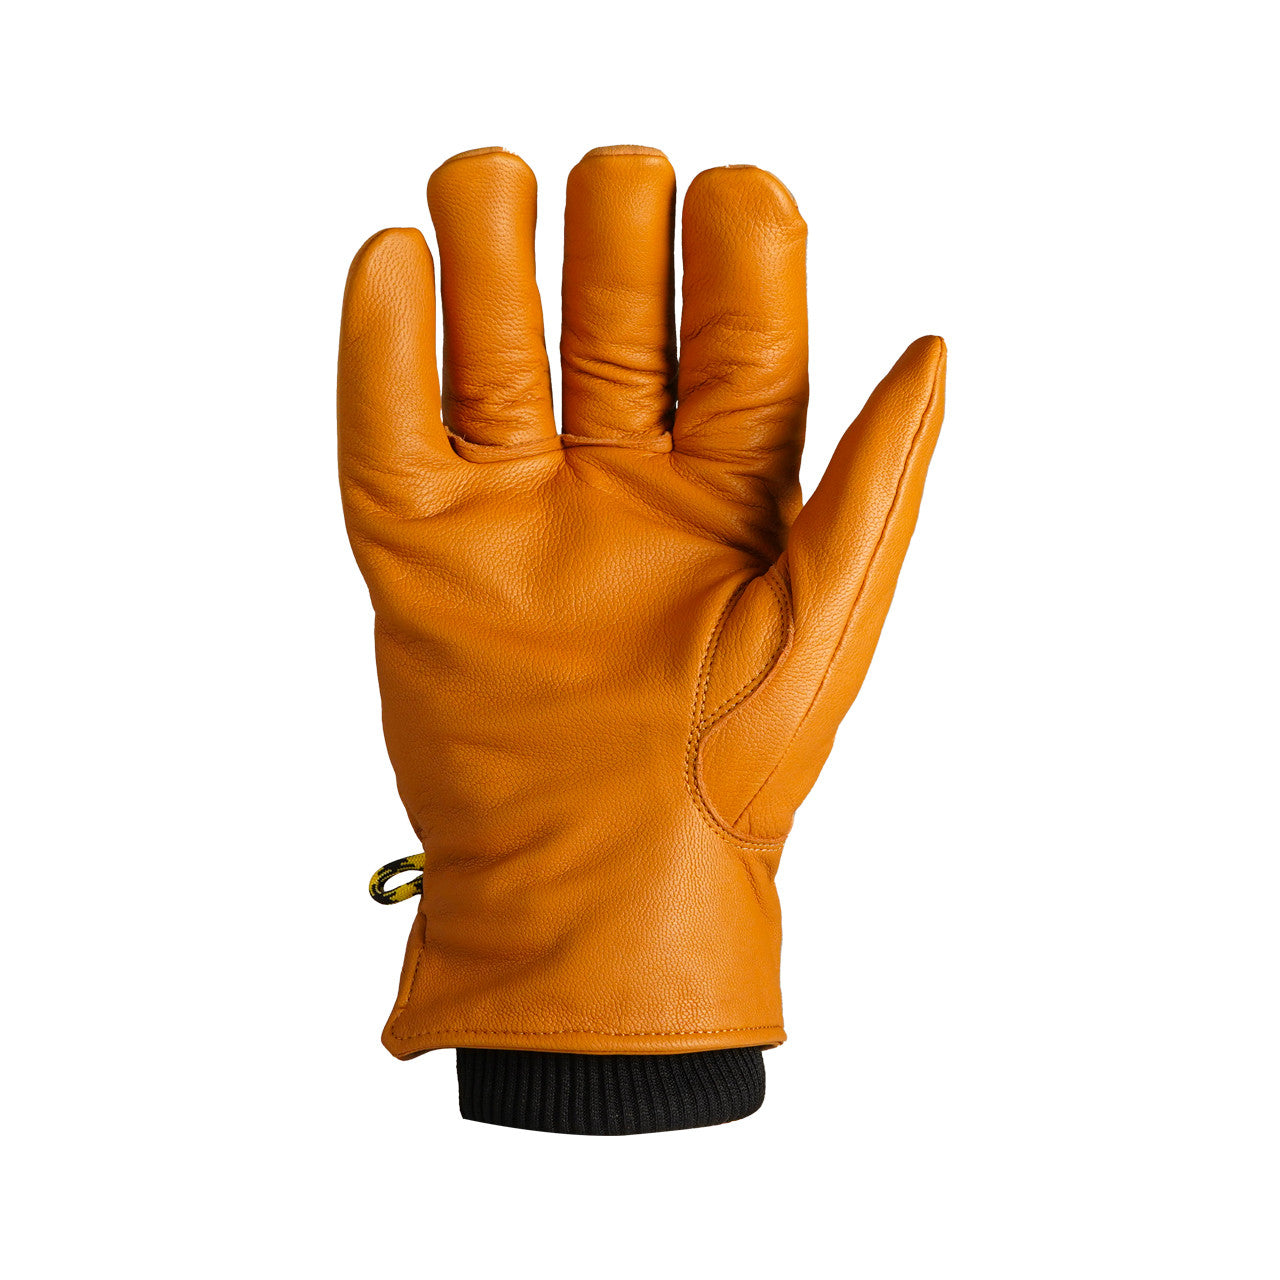 Ironclad RANCHWORX® Insulated Glove Tan-eSafety Supplies, Inc